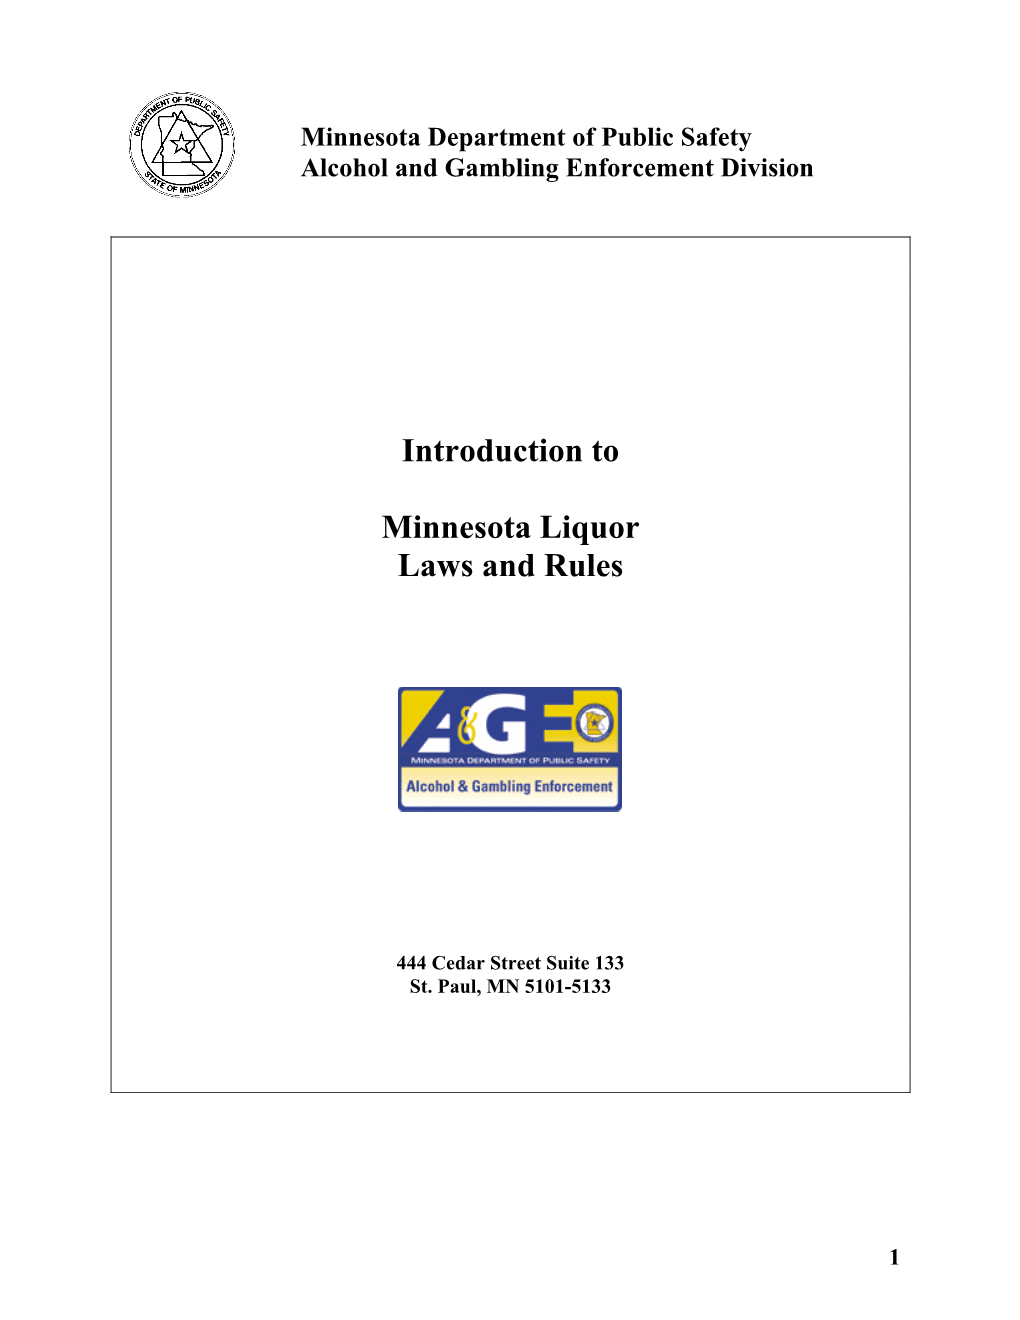 Introduction to Minnesota Liquor Laws and Rules